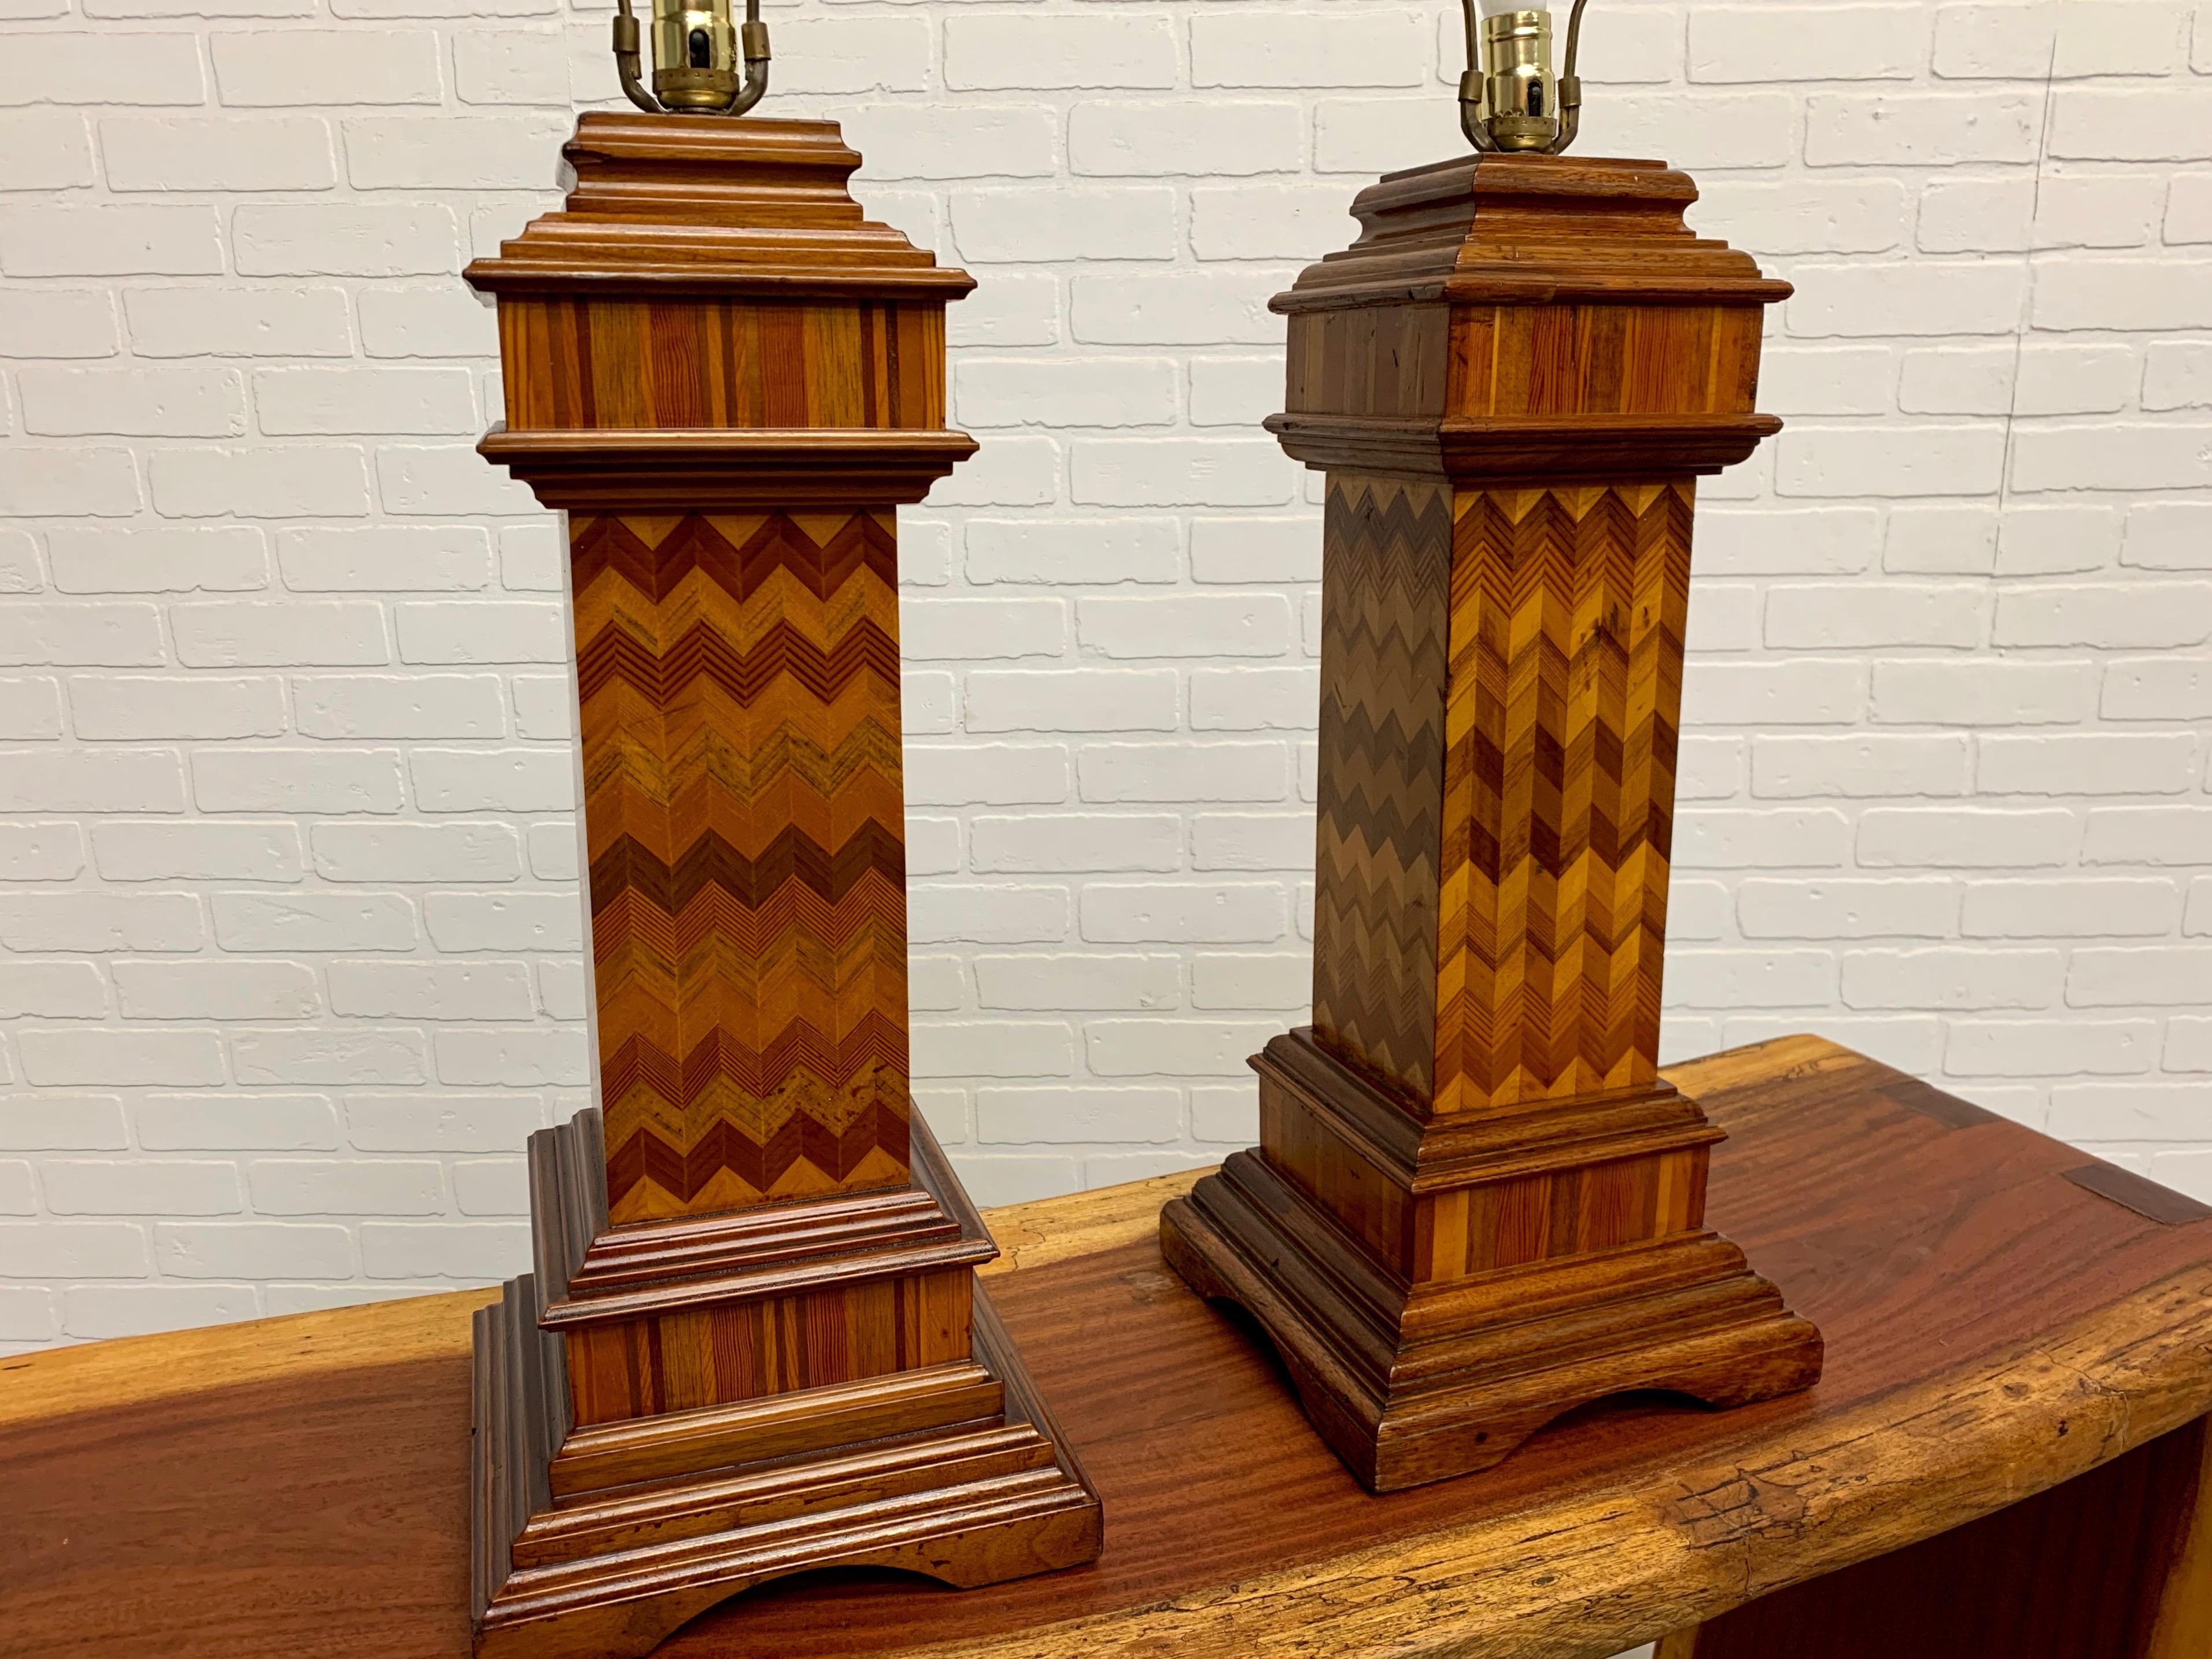 Unknown Antique Wood Lamps Made of Architectural Elements